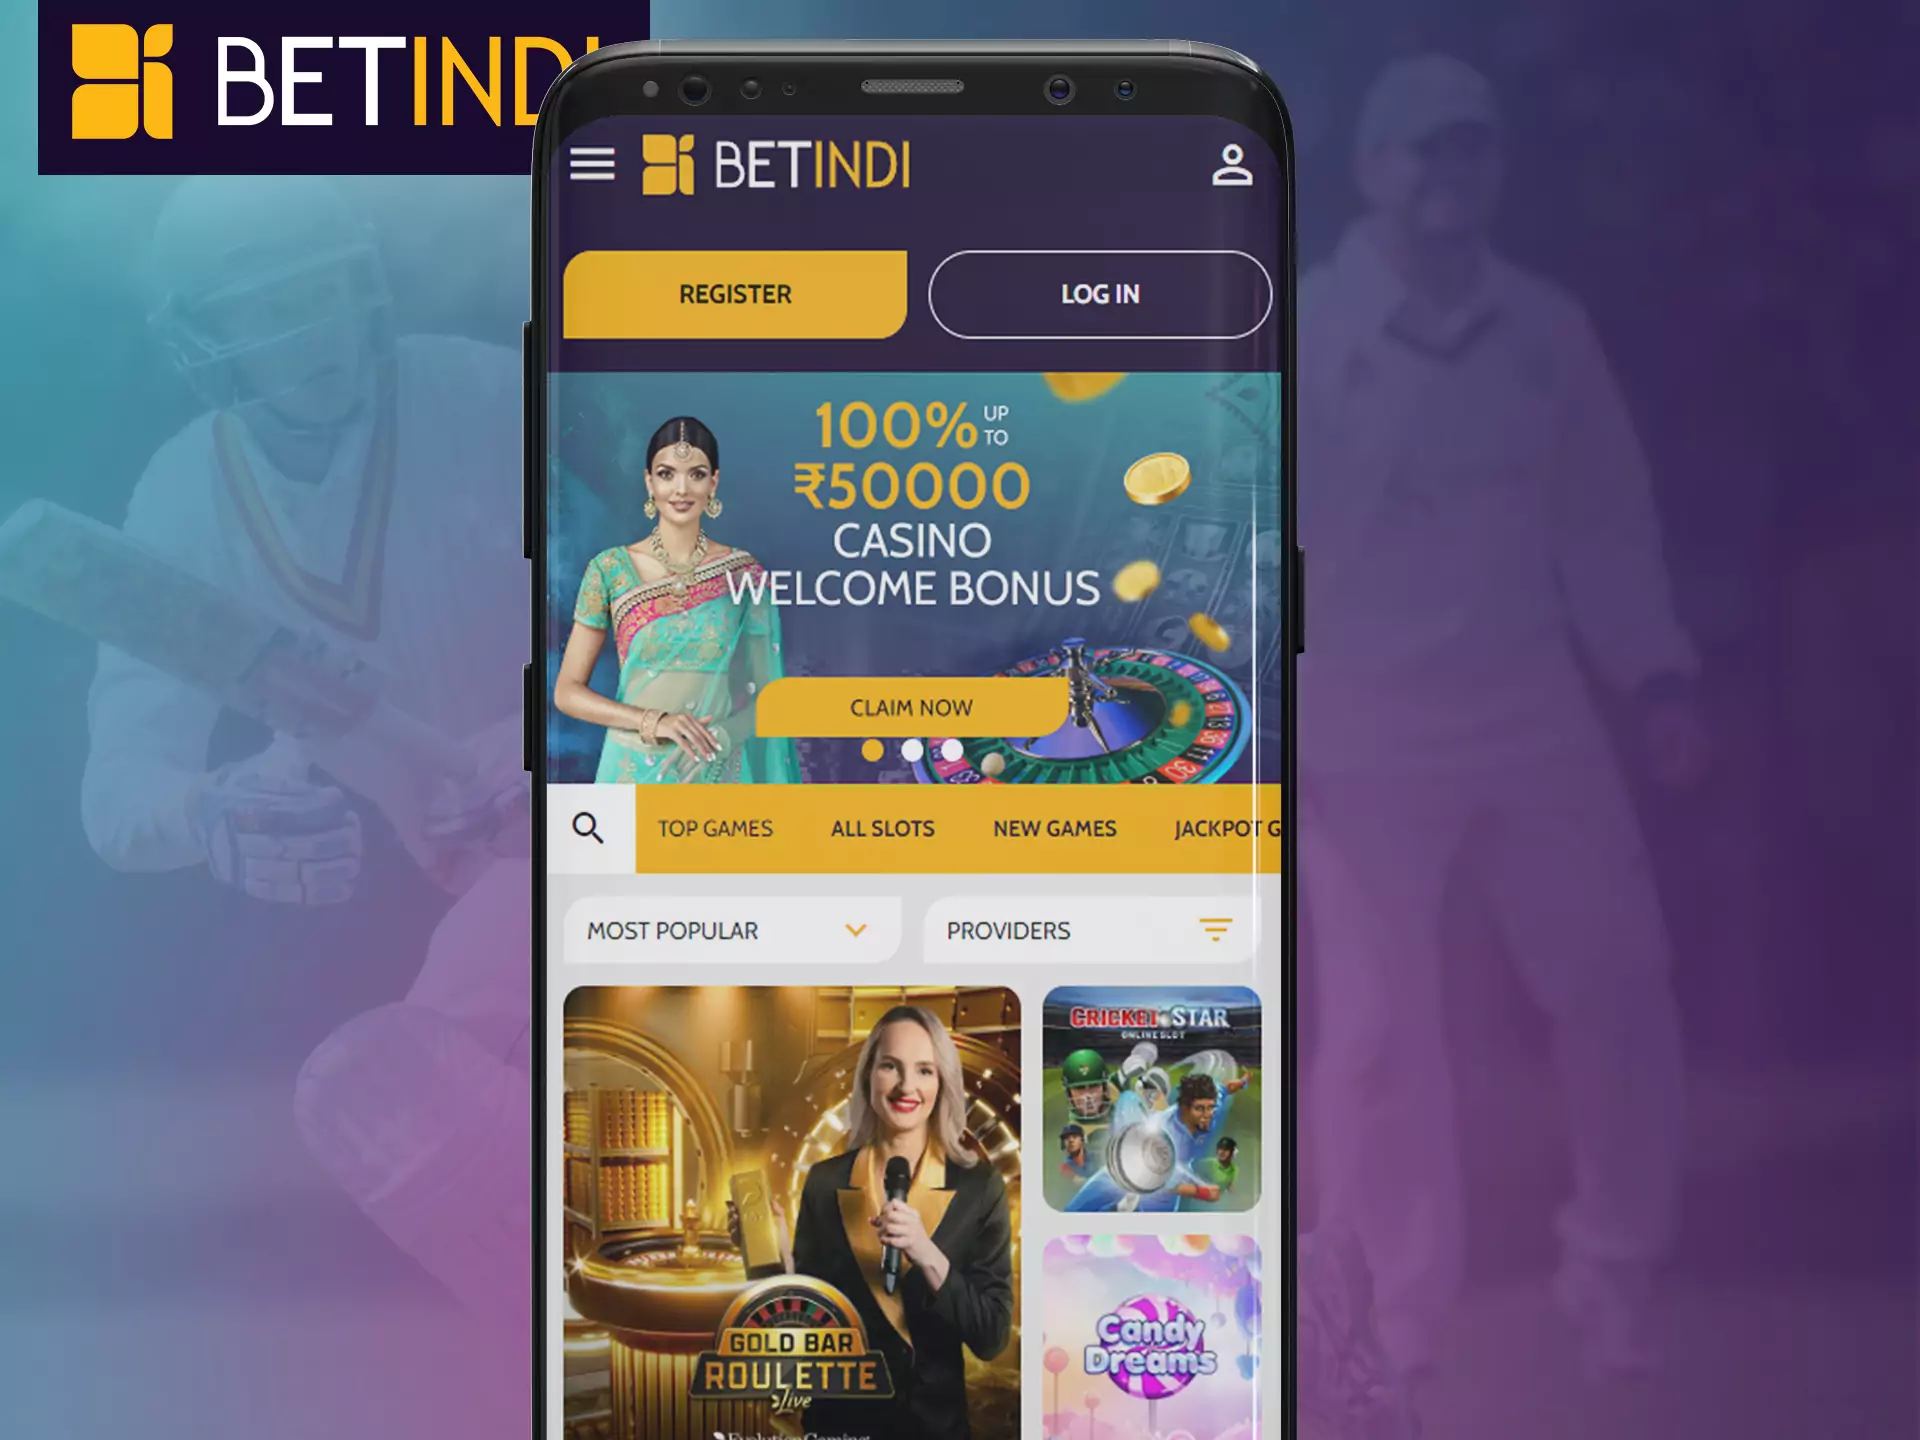 The mobile website of Betindi allows you to place bets and play anytime and anywhere.